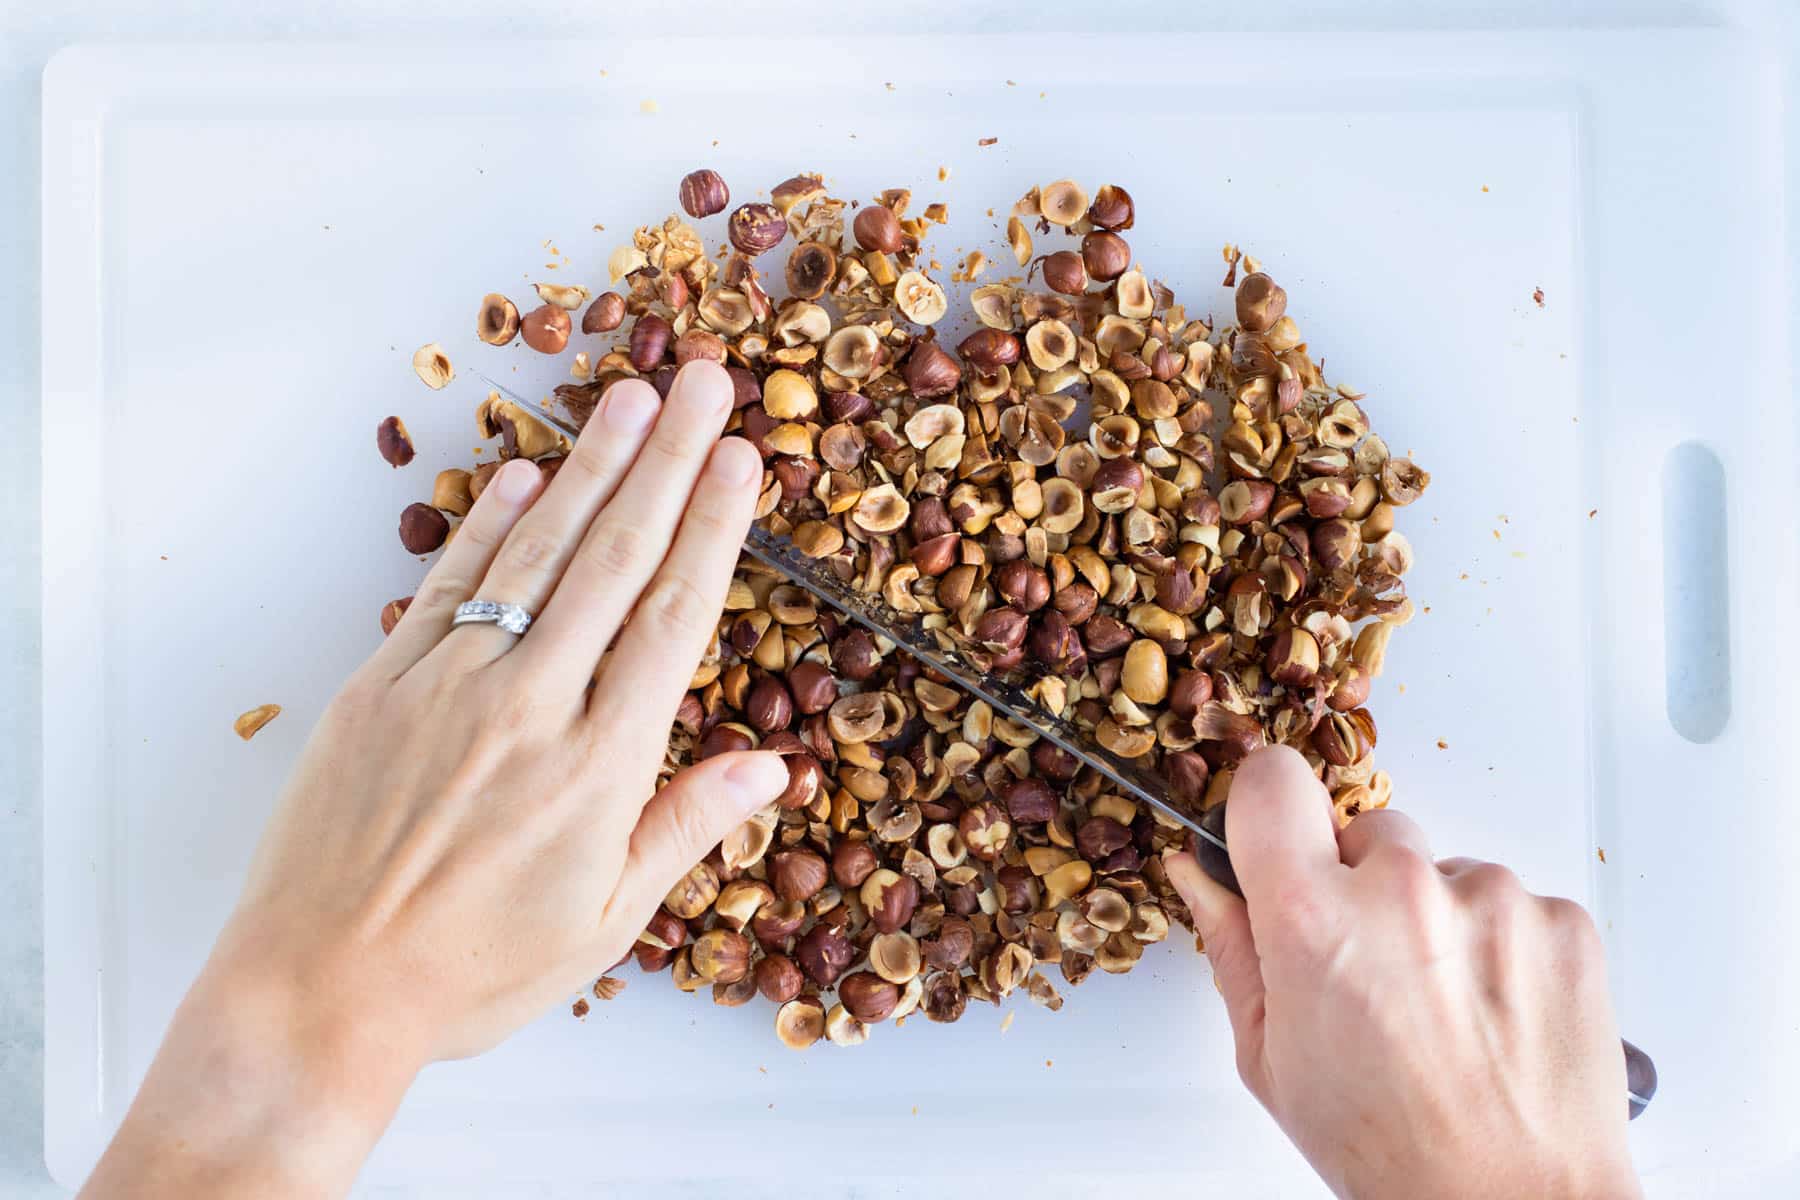 The roasted hazelnuts are chopped finely before blending.